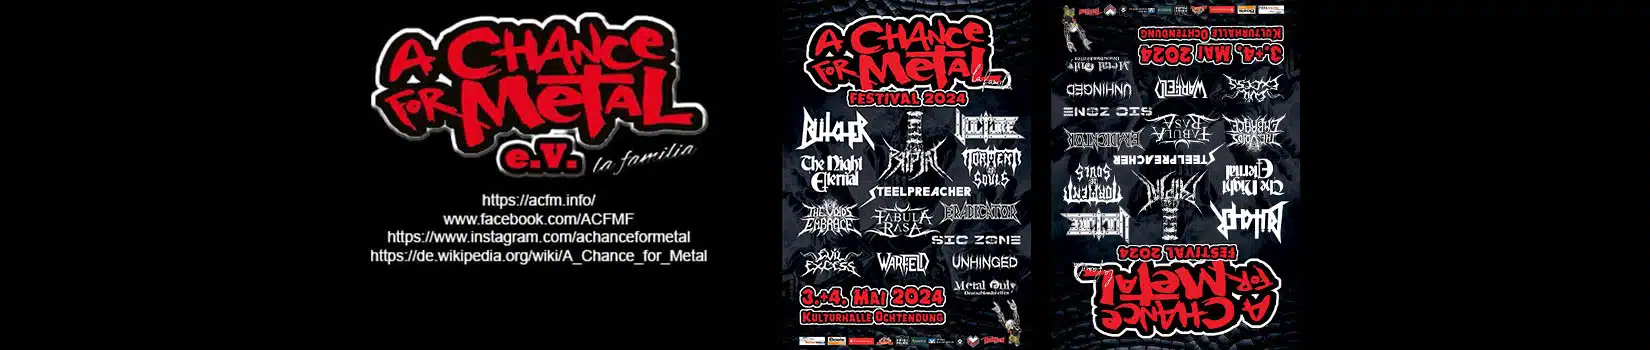 A CHANCE FOR METAL